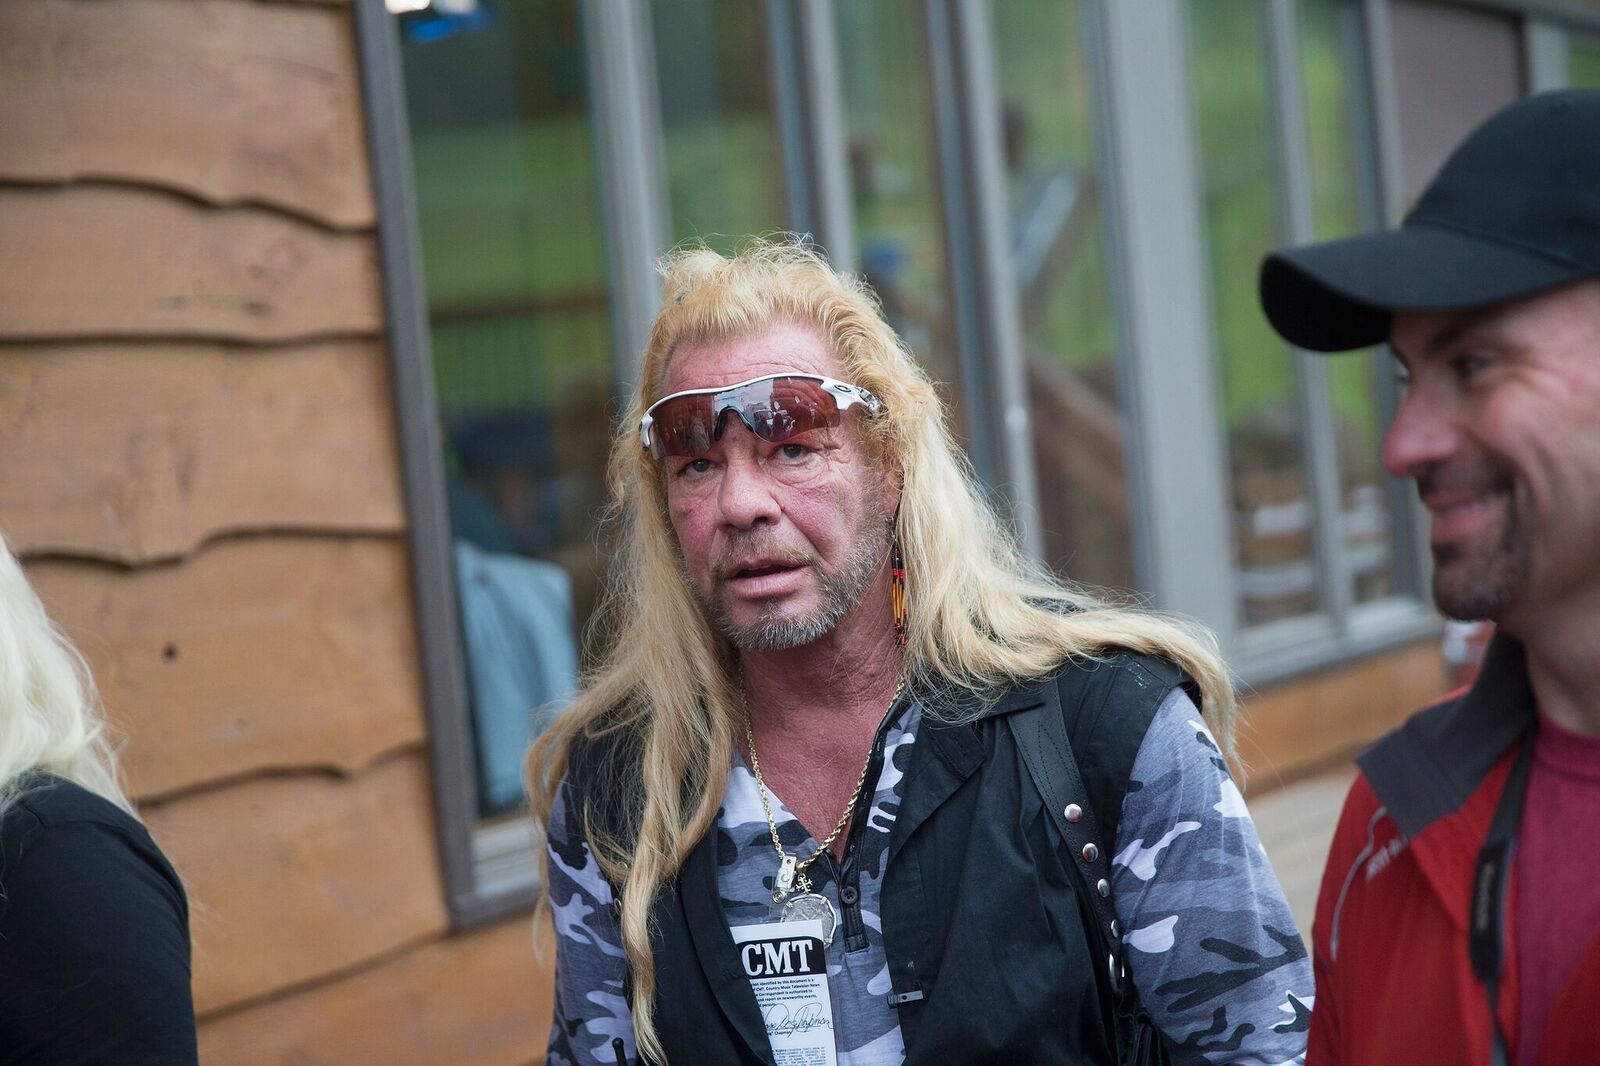 Duane Chapman filming outside a news conference on June 28, 2015, in Malone, New York | Photo: Scott Olson/Getty Images